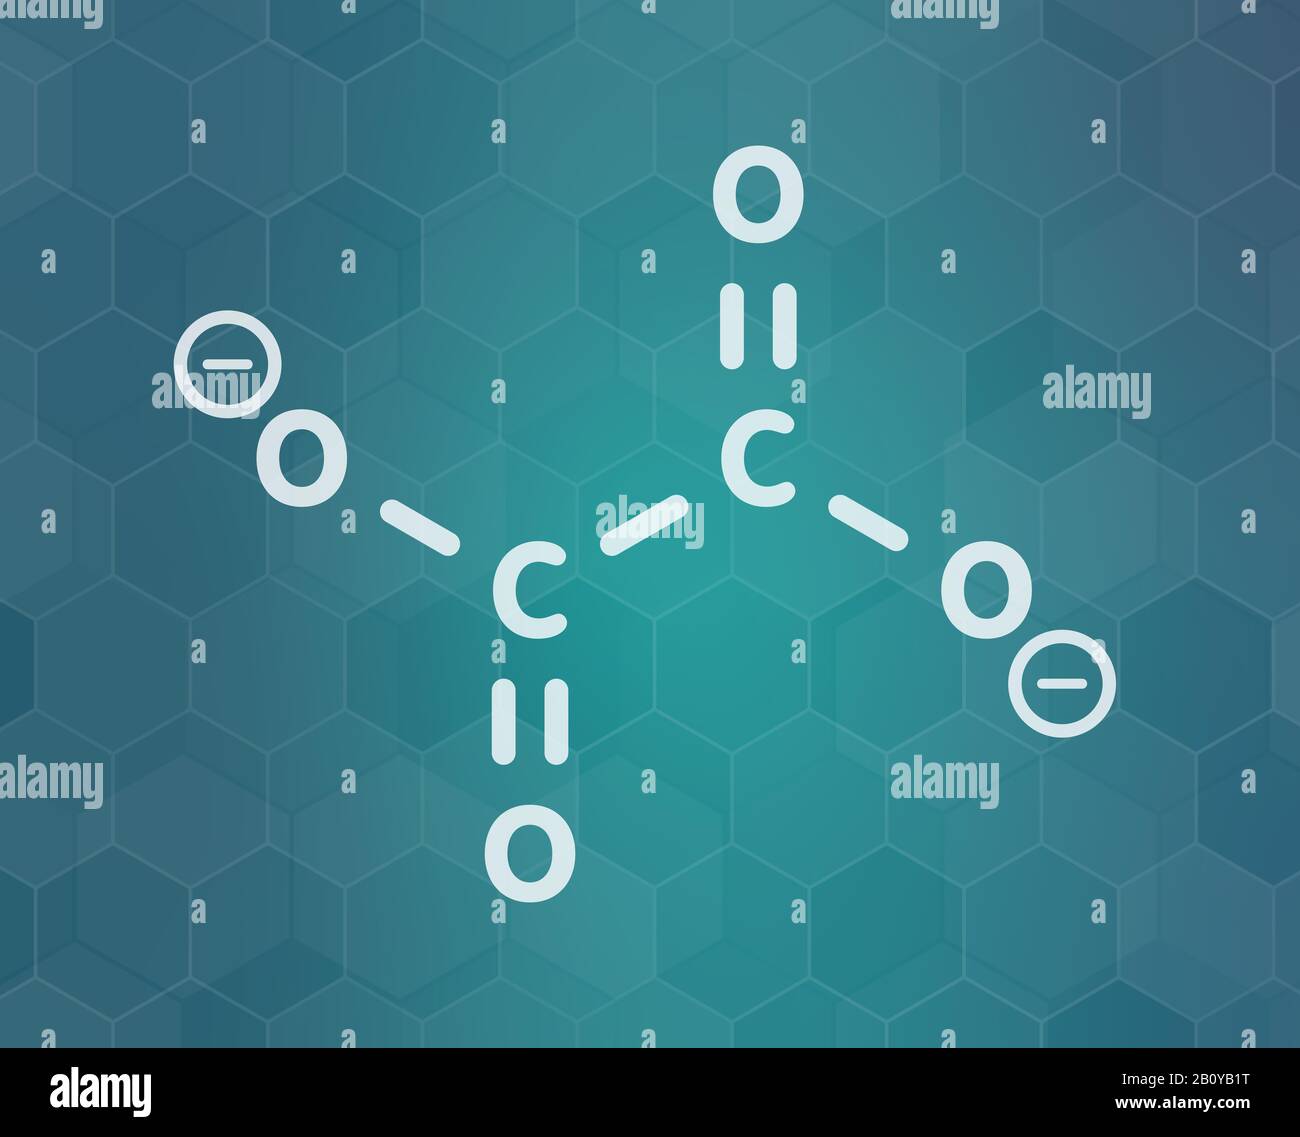 Oxalate anion chemical structure, illustration Stock Photo